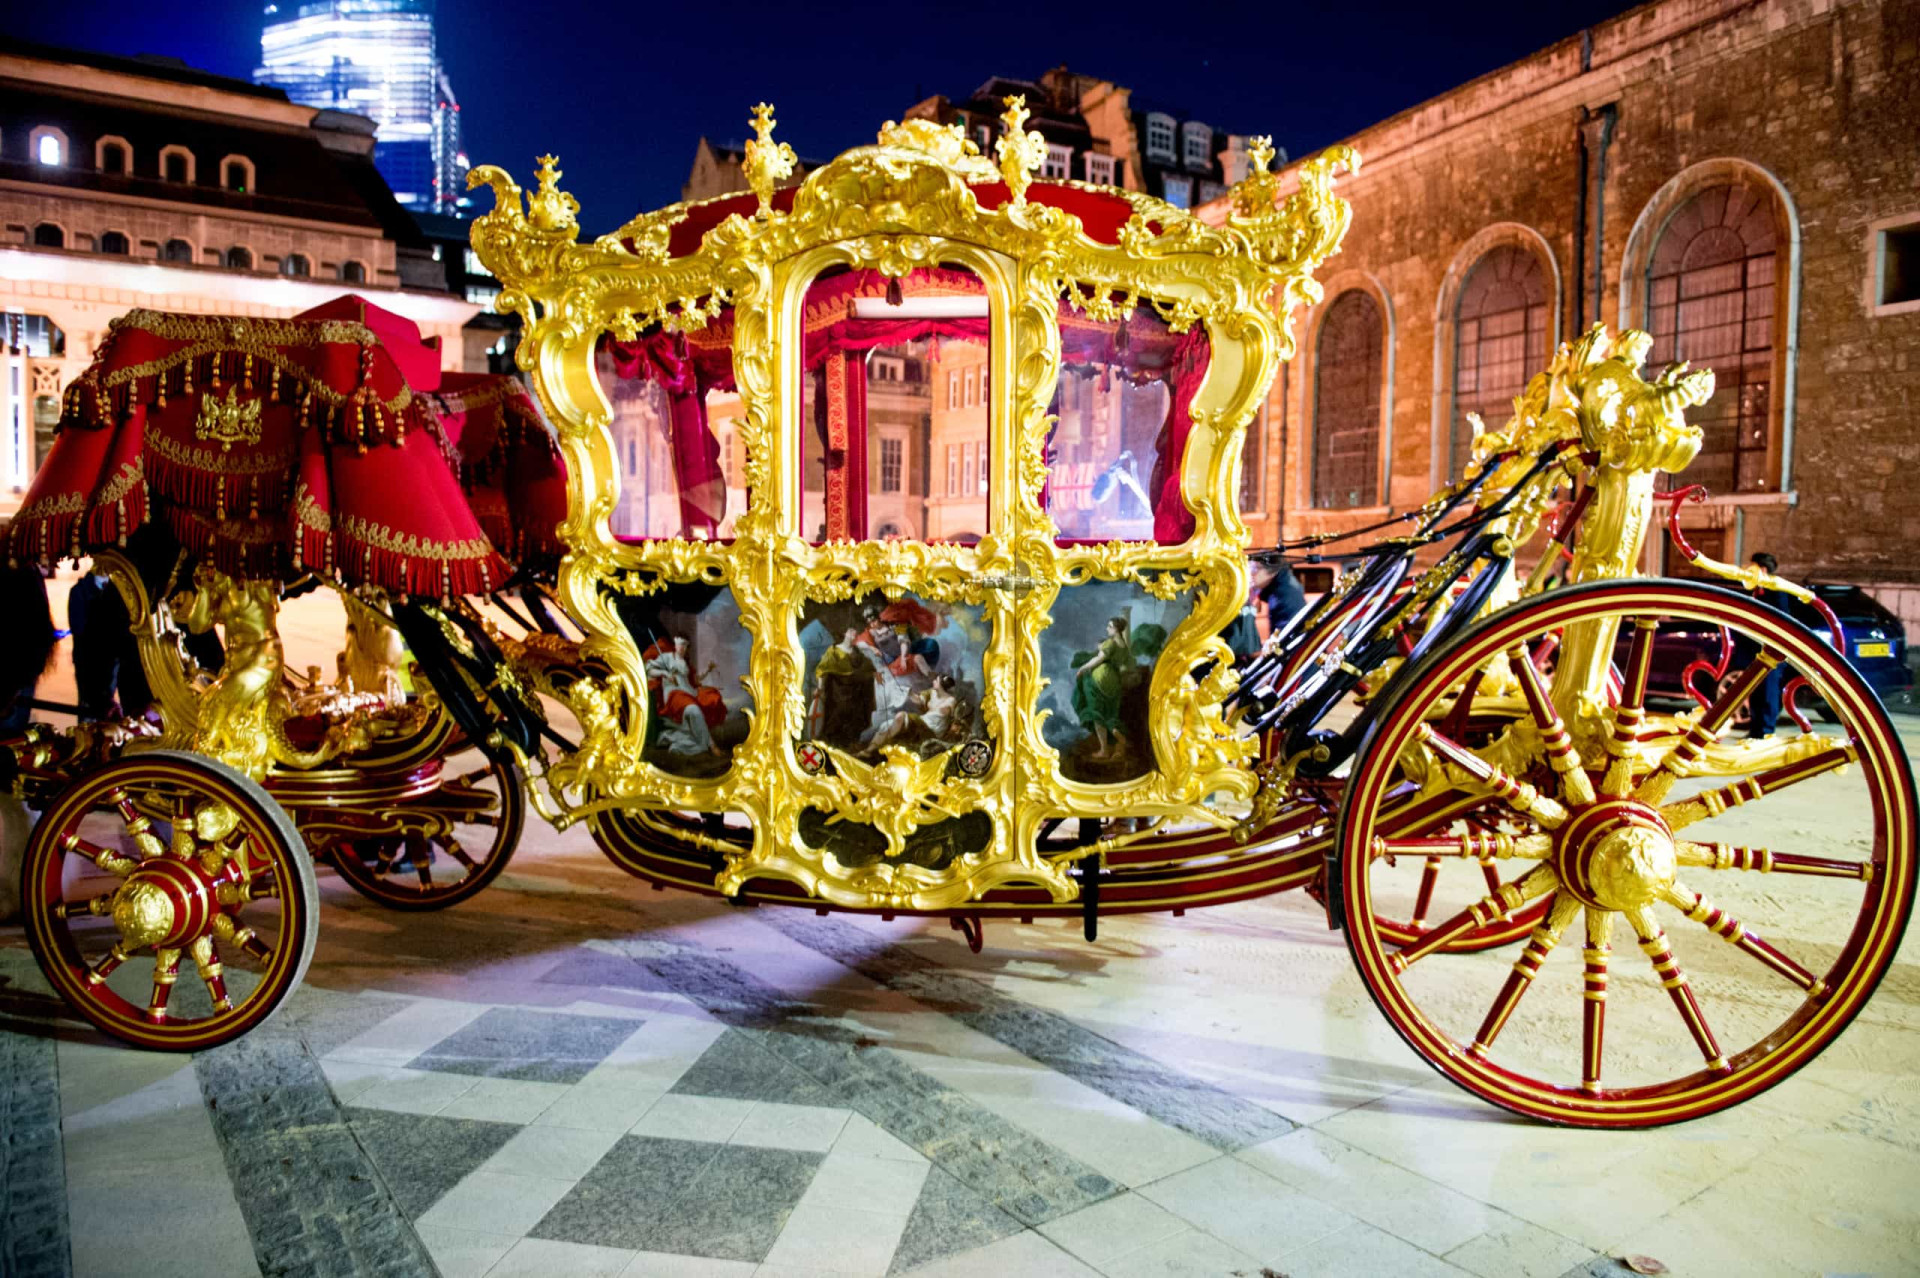 <p>The Lord Mayor of London's State Coach is the world's oldest ceremonial vehicle still in service, and has been used in every Lord Mayor's Show since 1757.</p><p>You may also like:<a href="https://www.starsinsider.com/n/343645?utm_source=msn.com&utm_medium=display&utm_campaign=referral_description&utm_content=516219v1en-us"> Rare finds: Celebrities who no one hates </a></p>